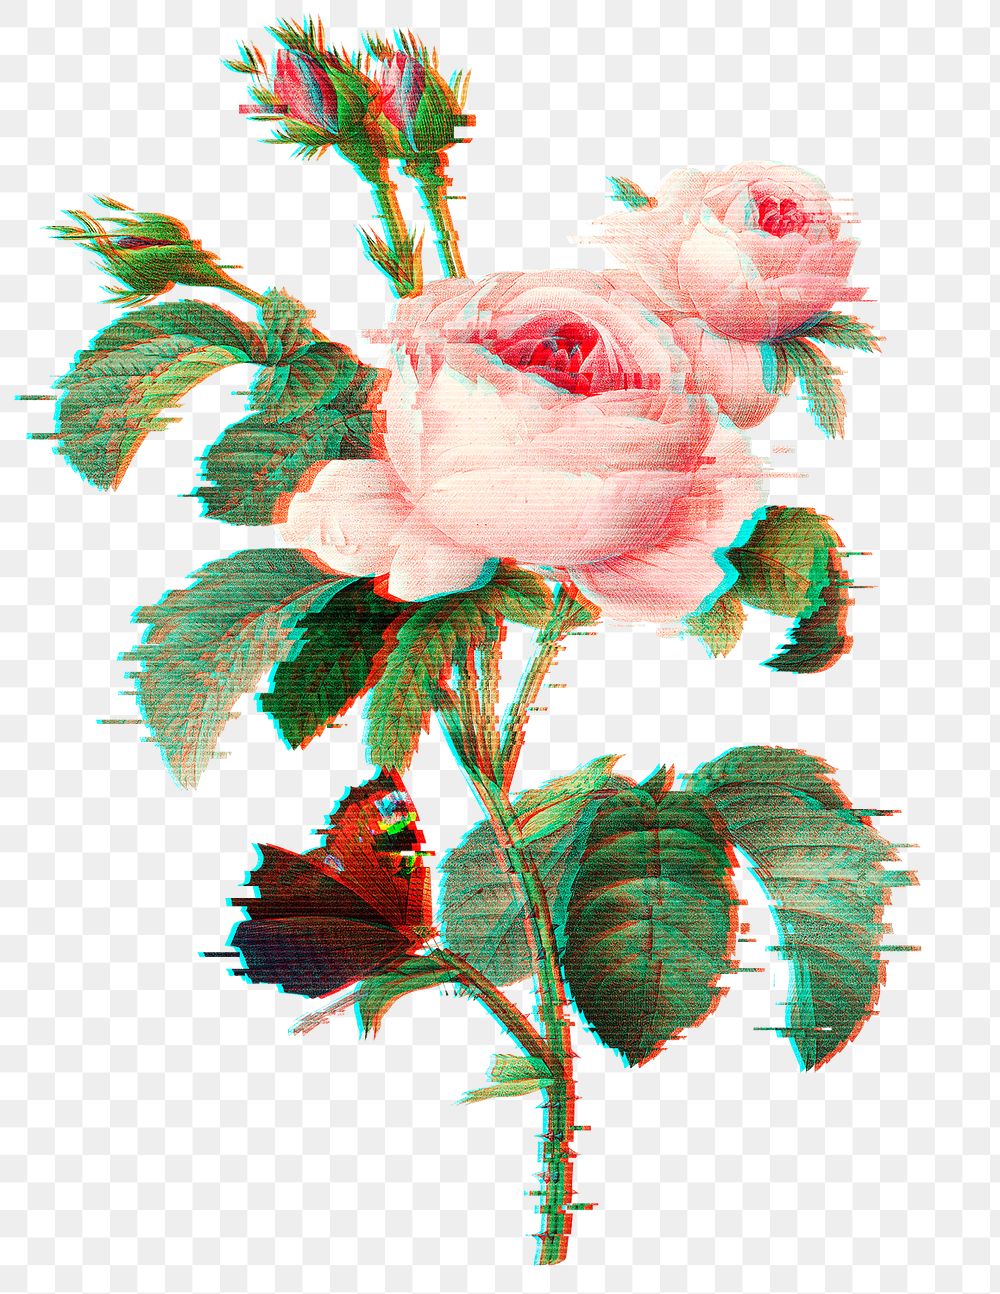 English rose with glitch effect design element